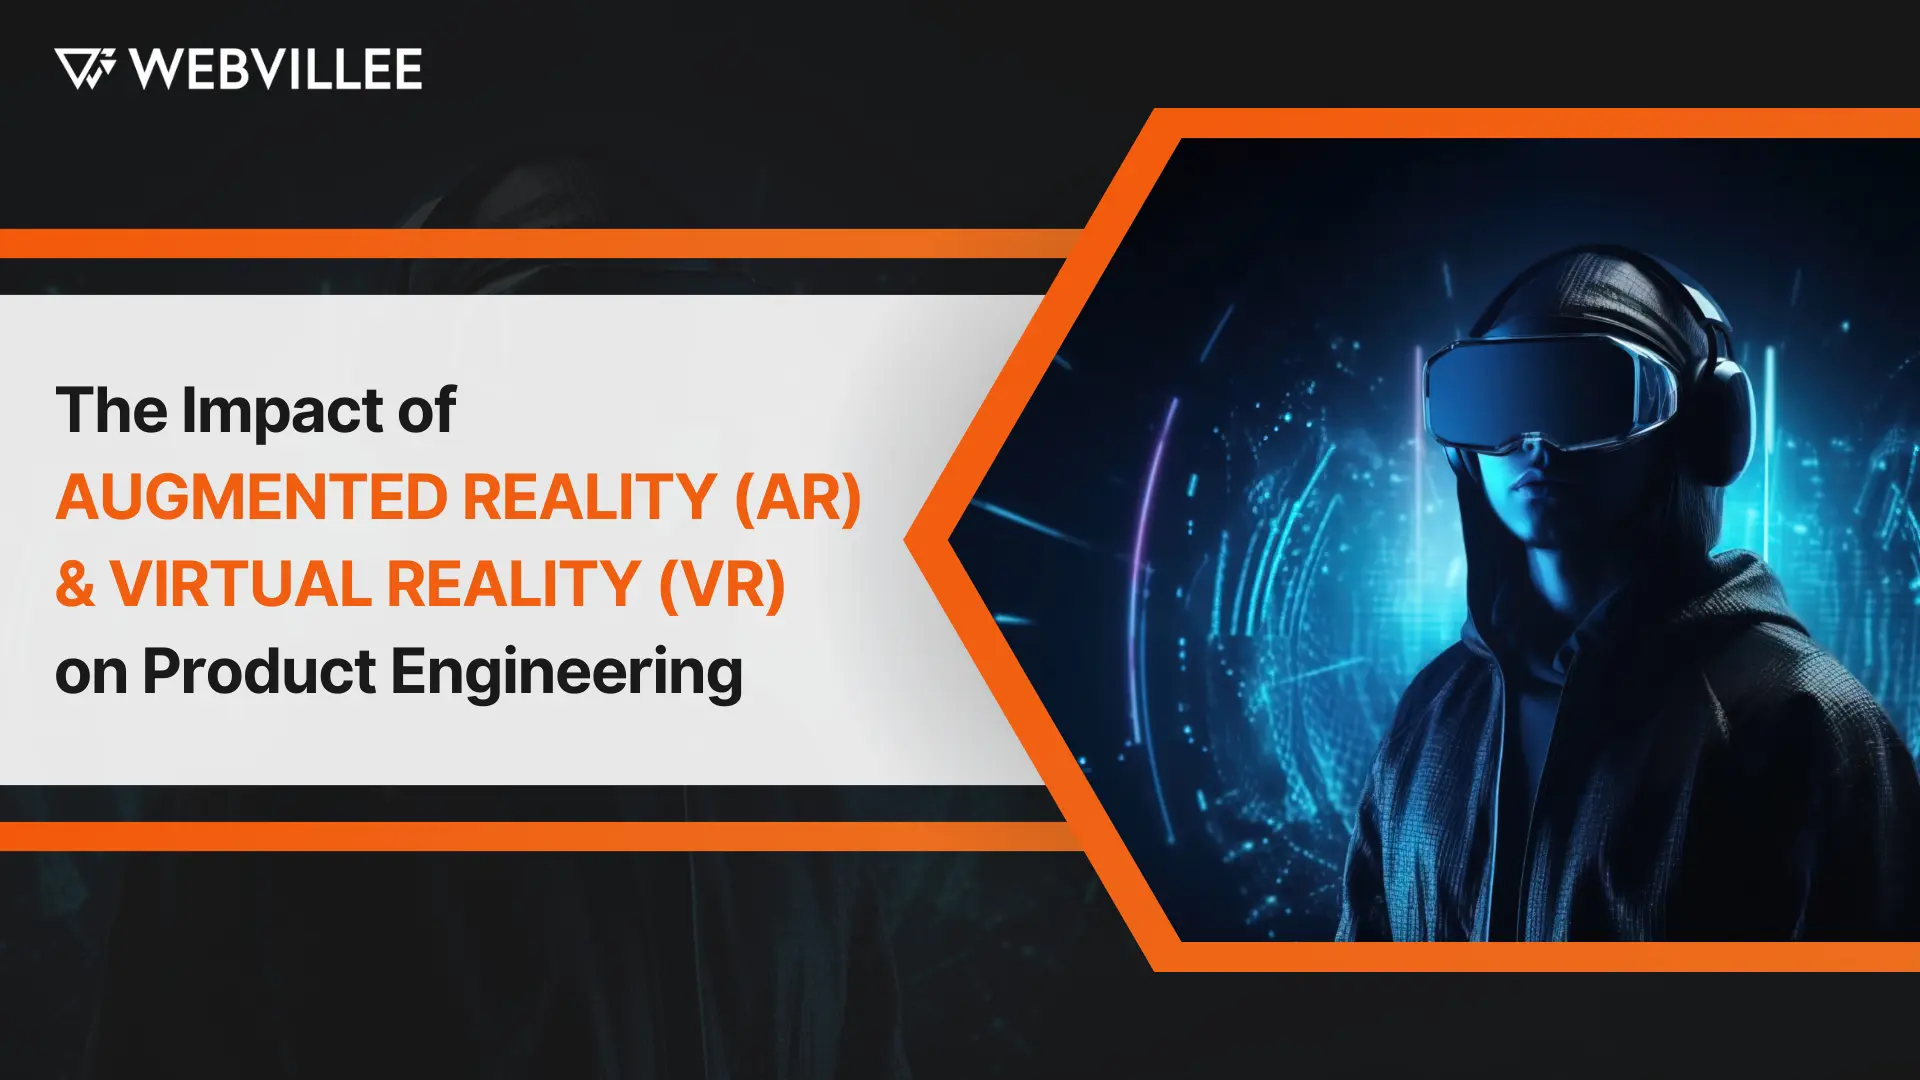 The Impact of Augmented Reality (AR) and Virtual Reality (VR) on Product Engineering